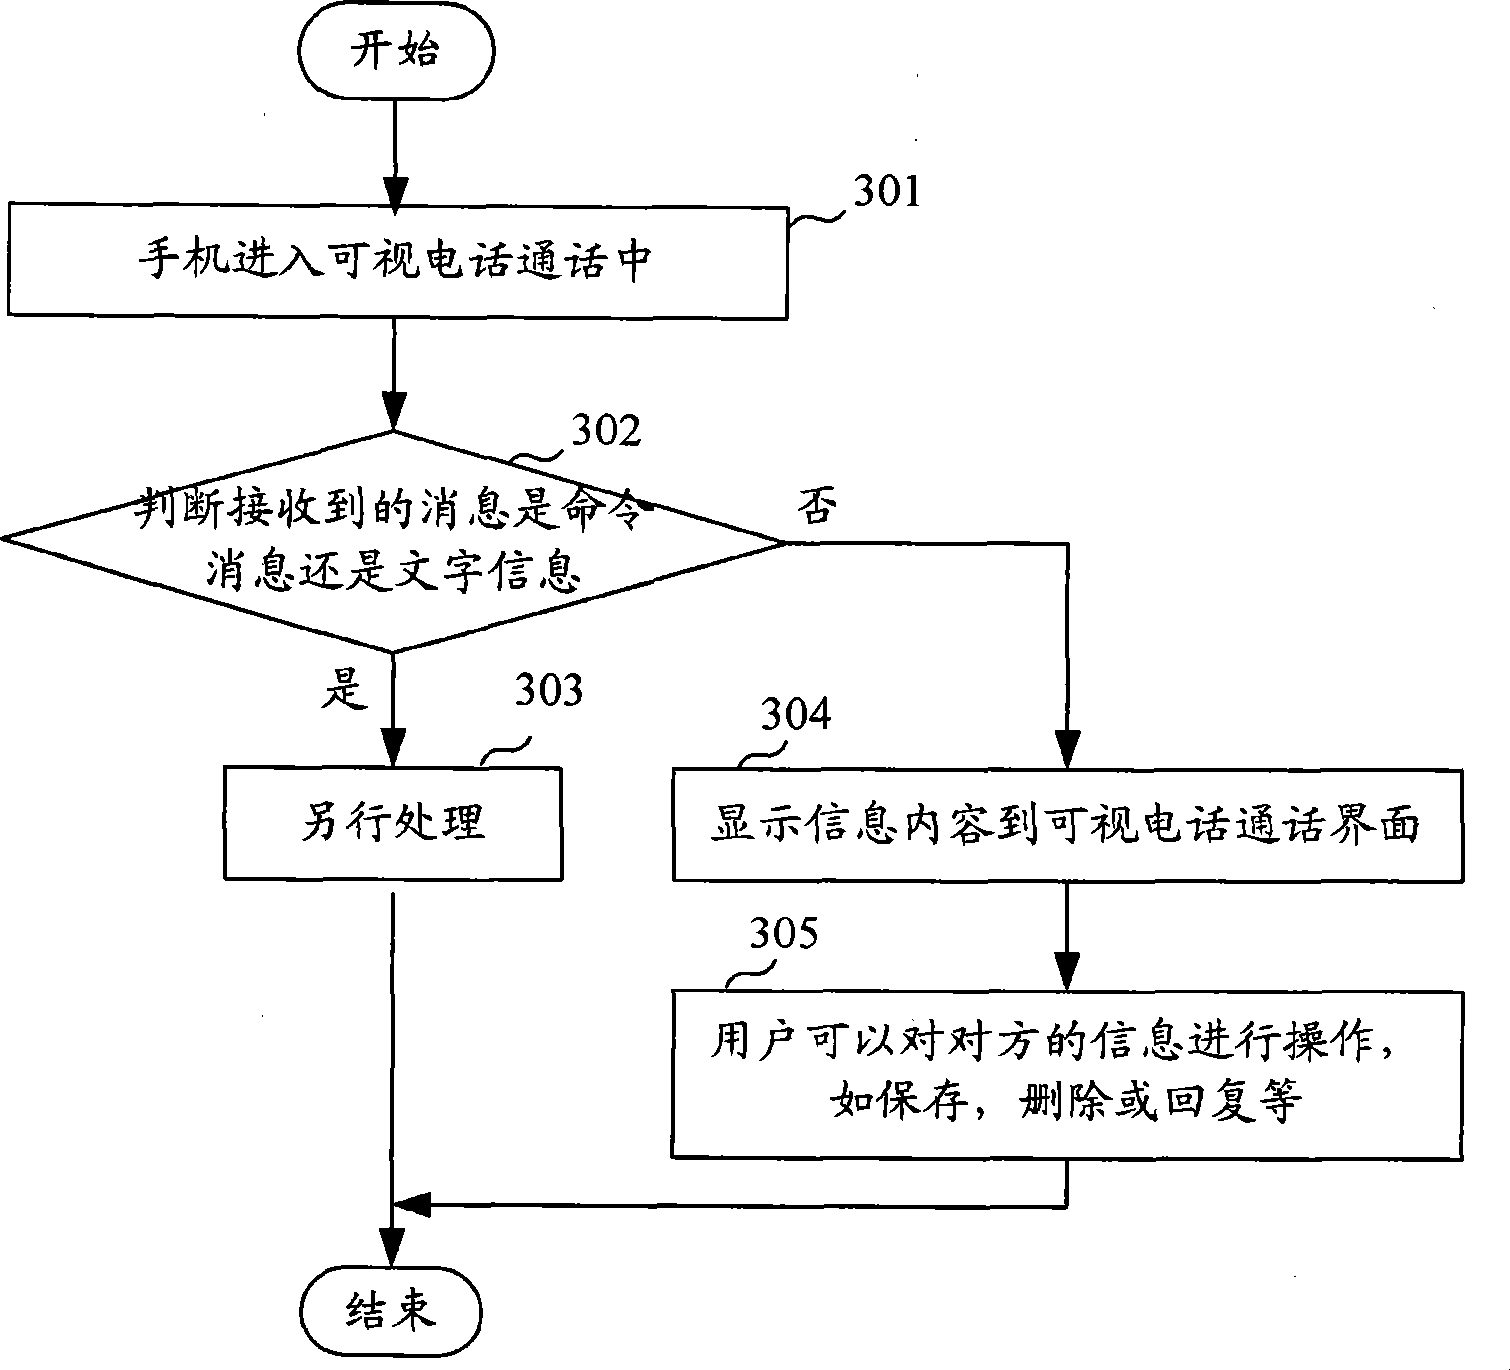 Text information transferring method in visual telephone calling